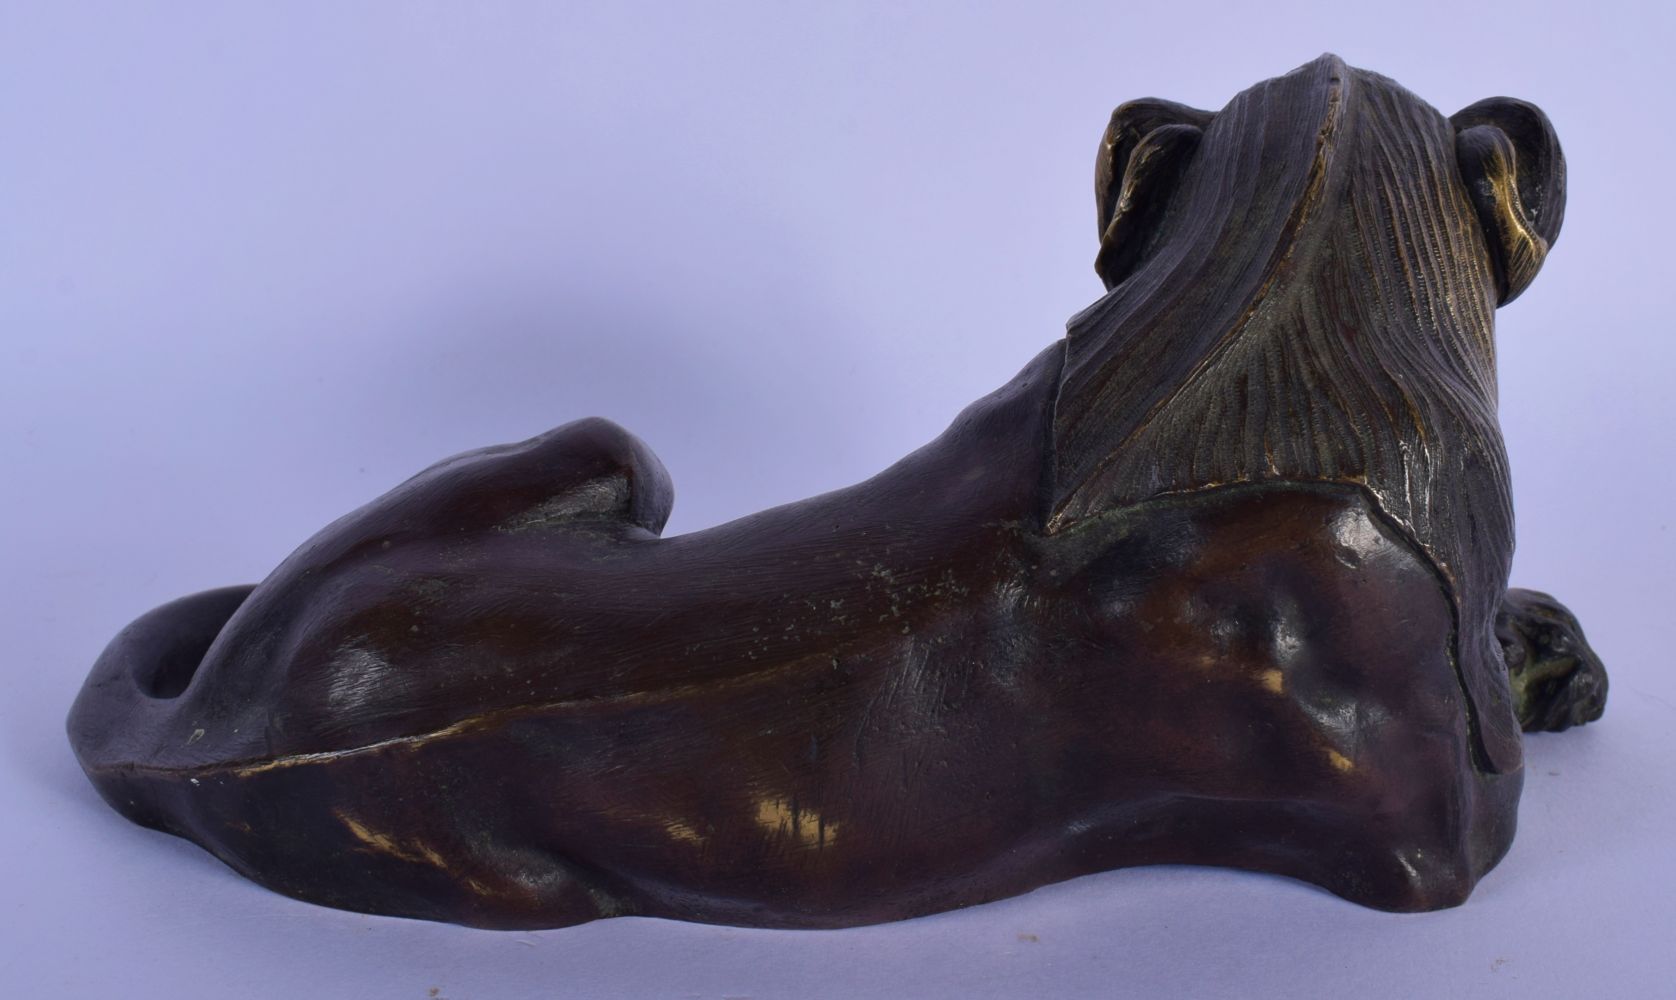 A 17TH/18TH CENTURY EUROPEAN BRONZE FIGURE OF A RECLINING LION modelled looking solemn. 18 cm x 9 cm - Image 2 of 6